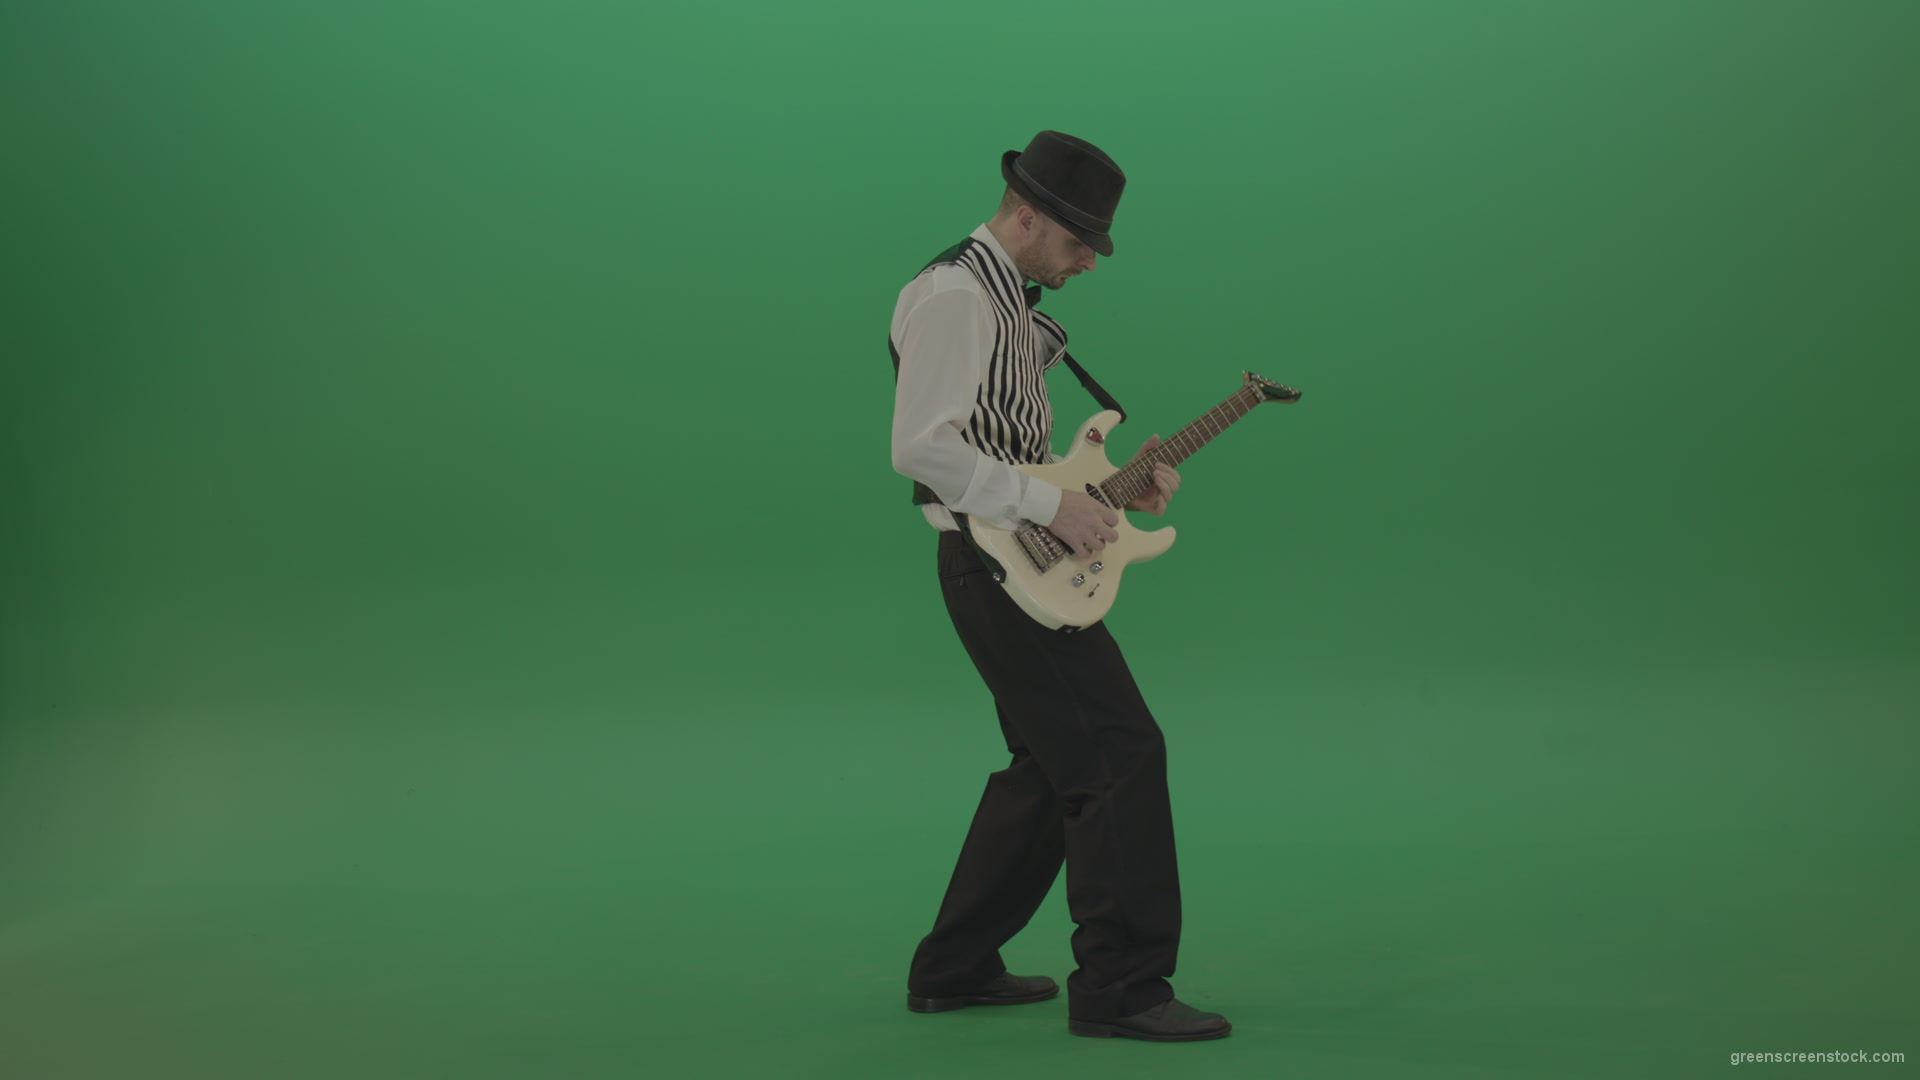 Jazz-man-musician-play-guitar-solo-music-in-guitar-on-green-screen-isolated-in-side-view_001 Green Screen Stock